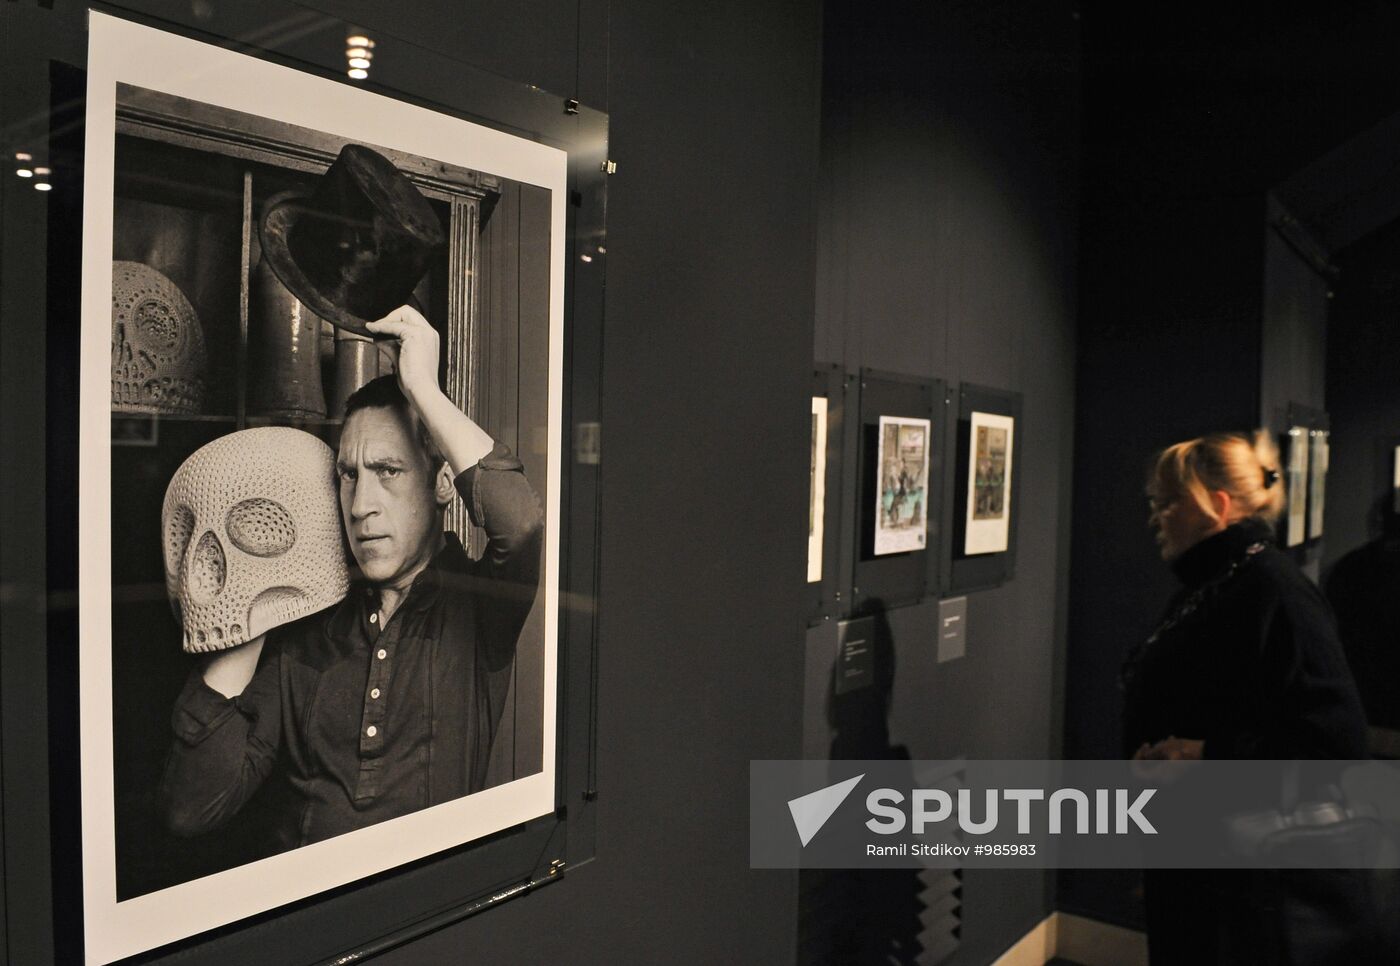 Opening exhibition "Shemyakin. Vysotsky. Two Destinies"